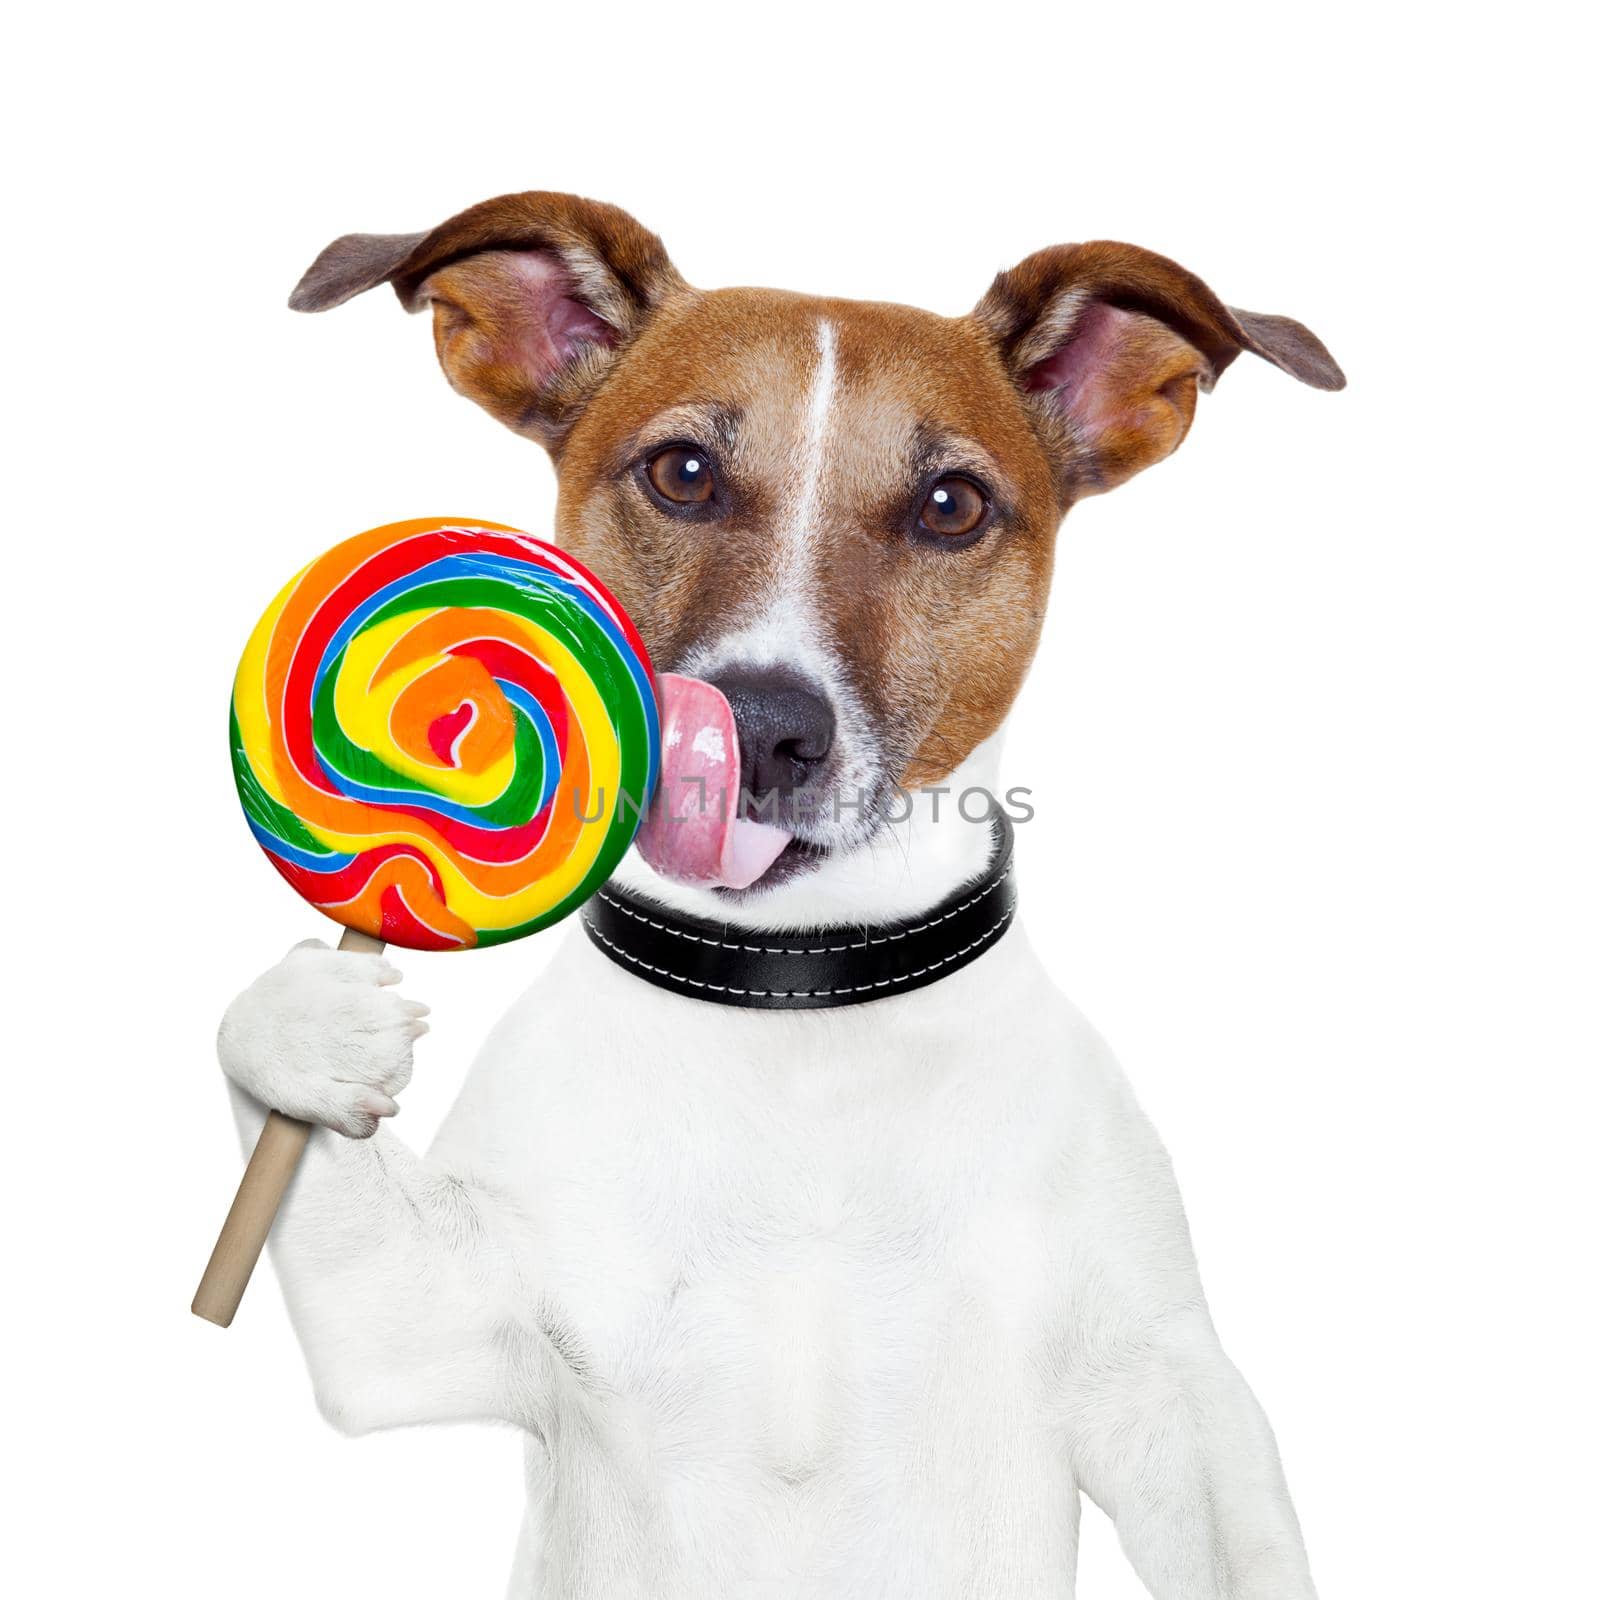 candy lollypop  licking  dog by Brosch